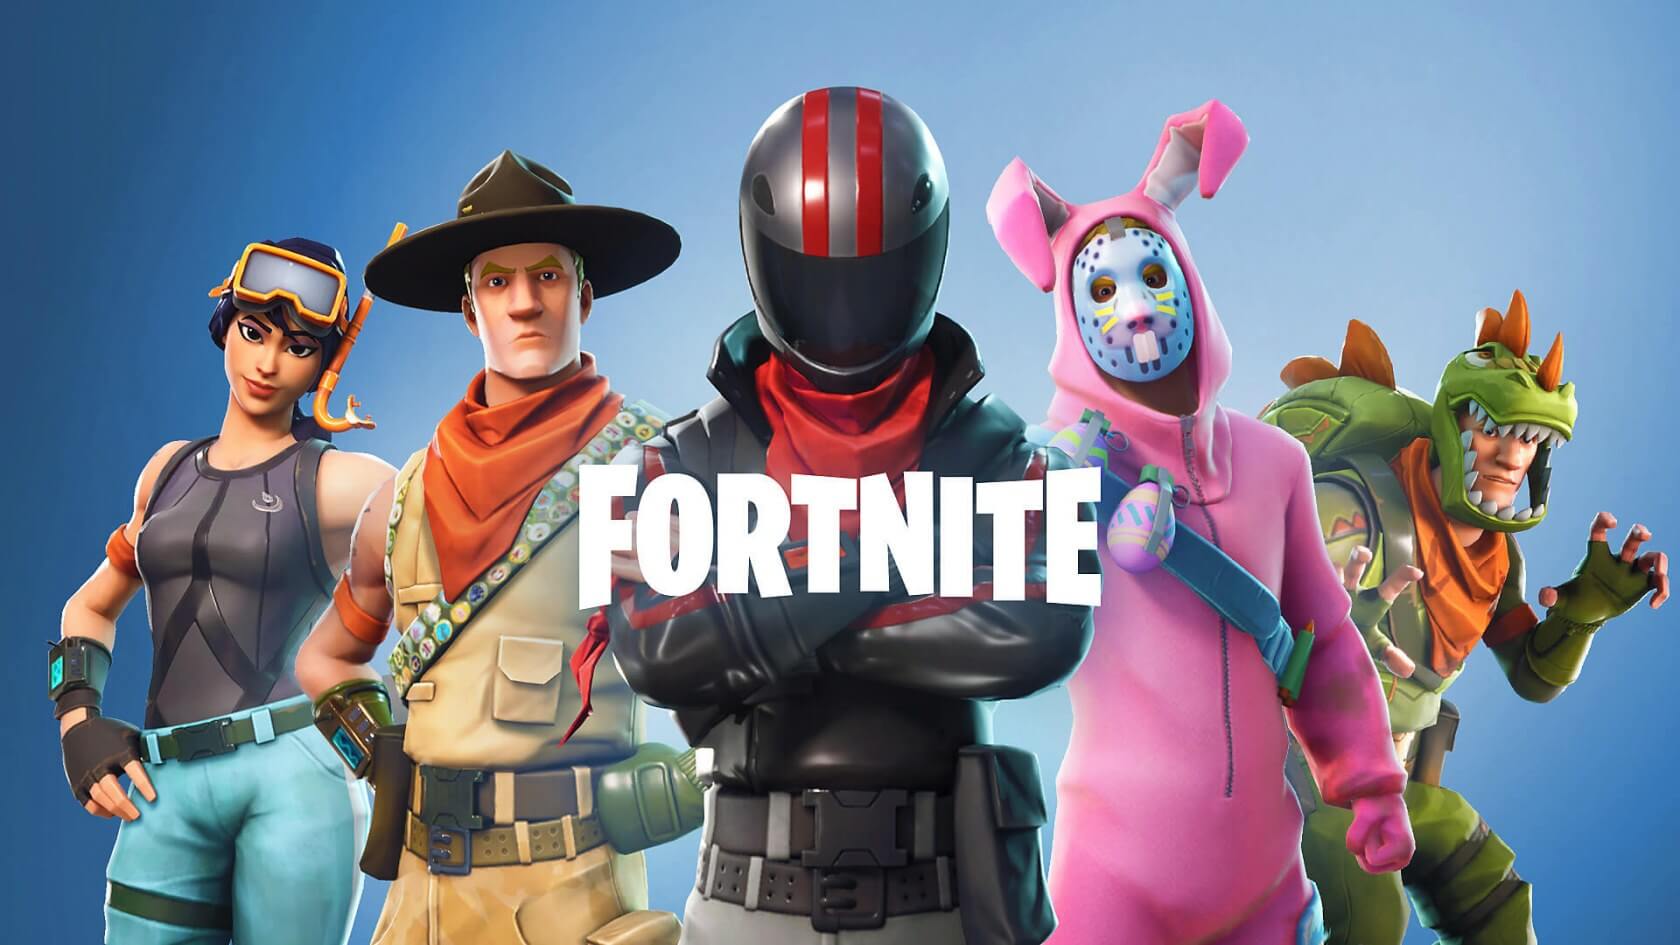 Data miners uncover a Fortnite skin that might be a Samsung/Android exclusive